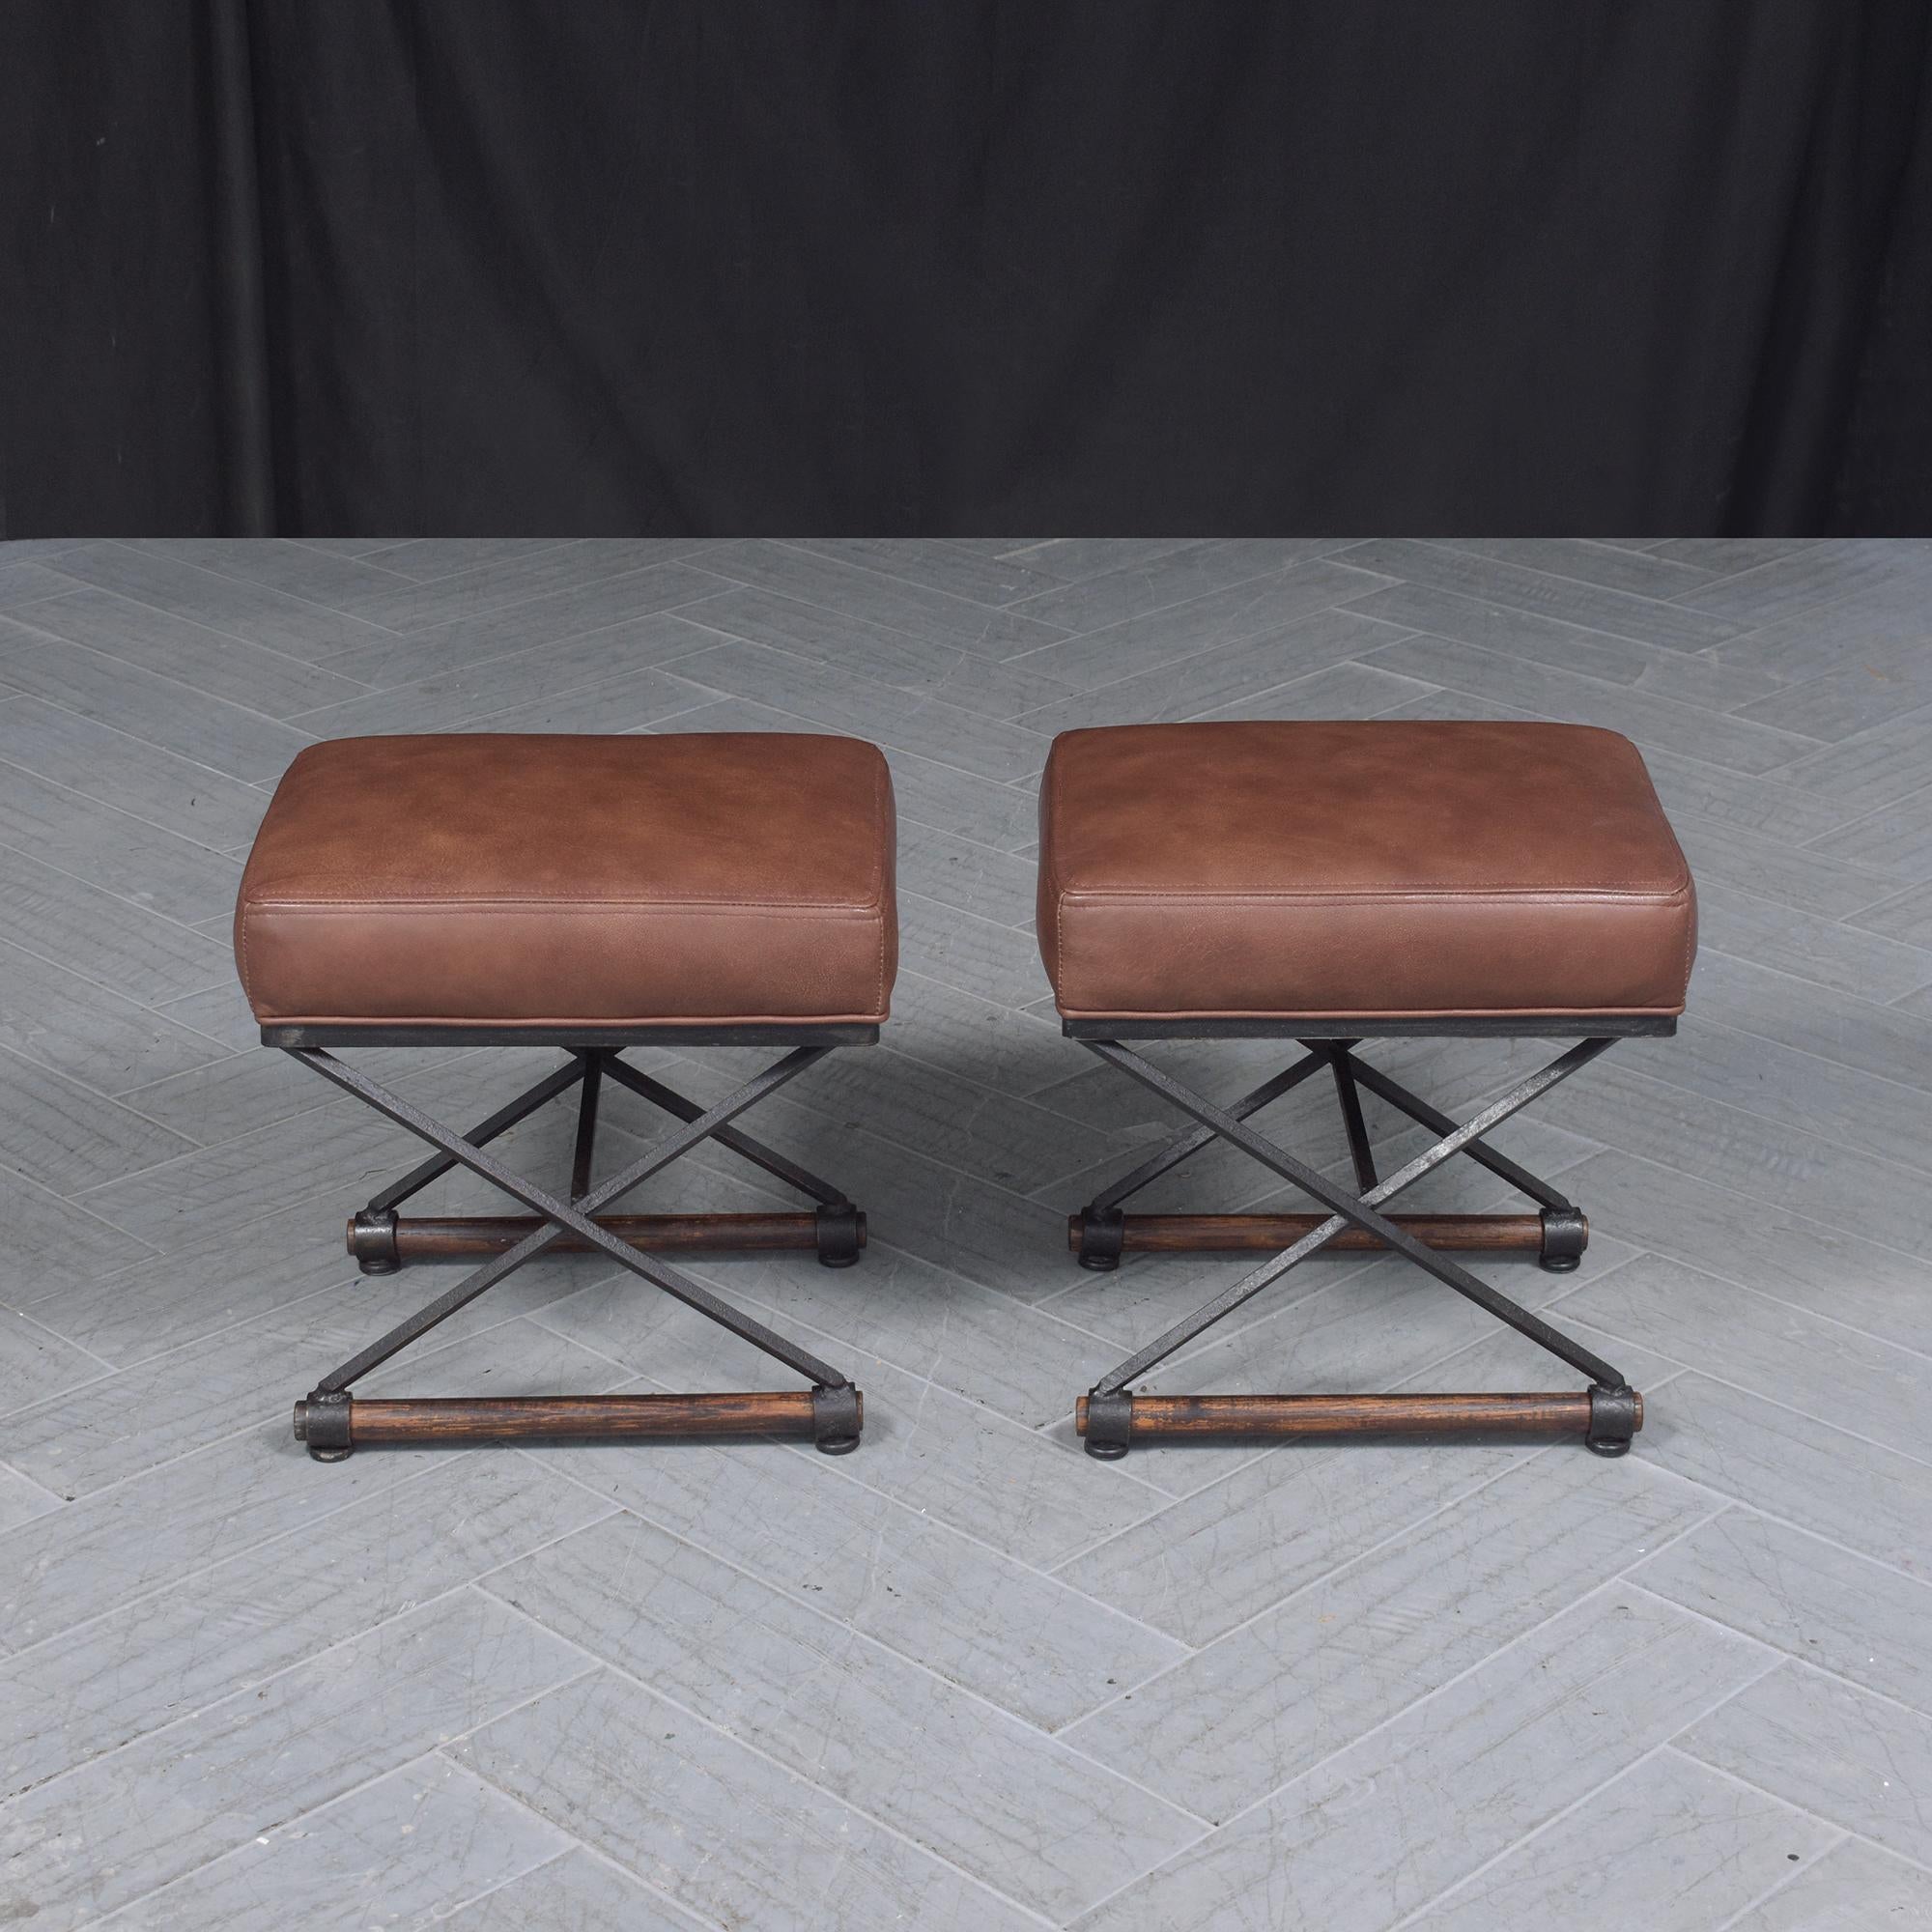 Restored 1970s Campaign Benches: Iron & Oak with Dark Brown Leather Upholstery 1